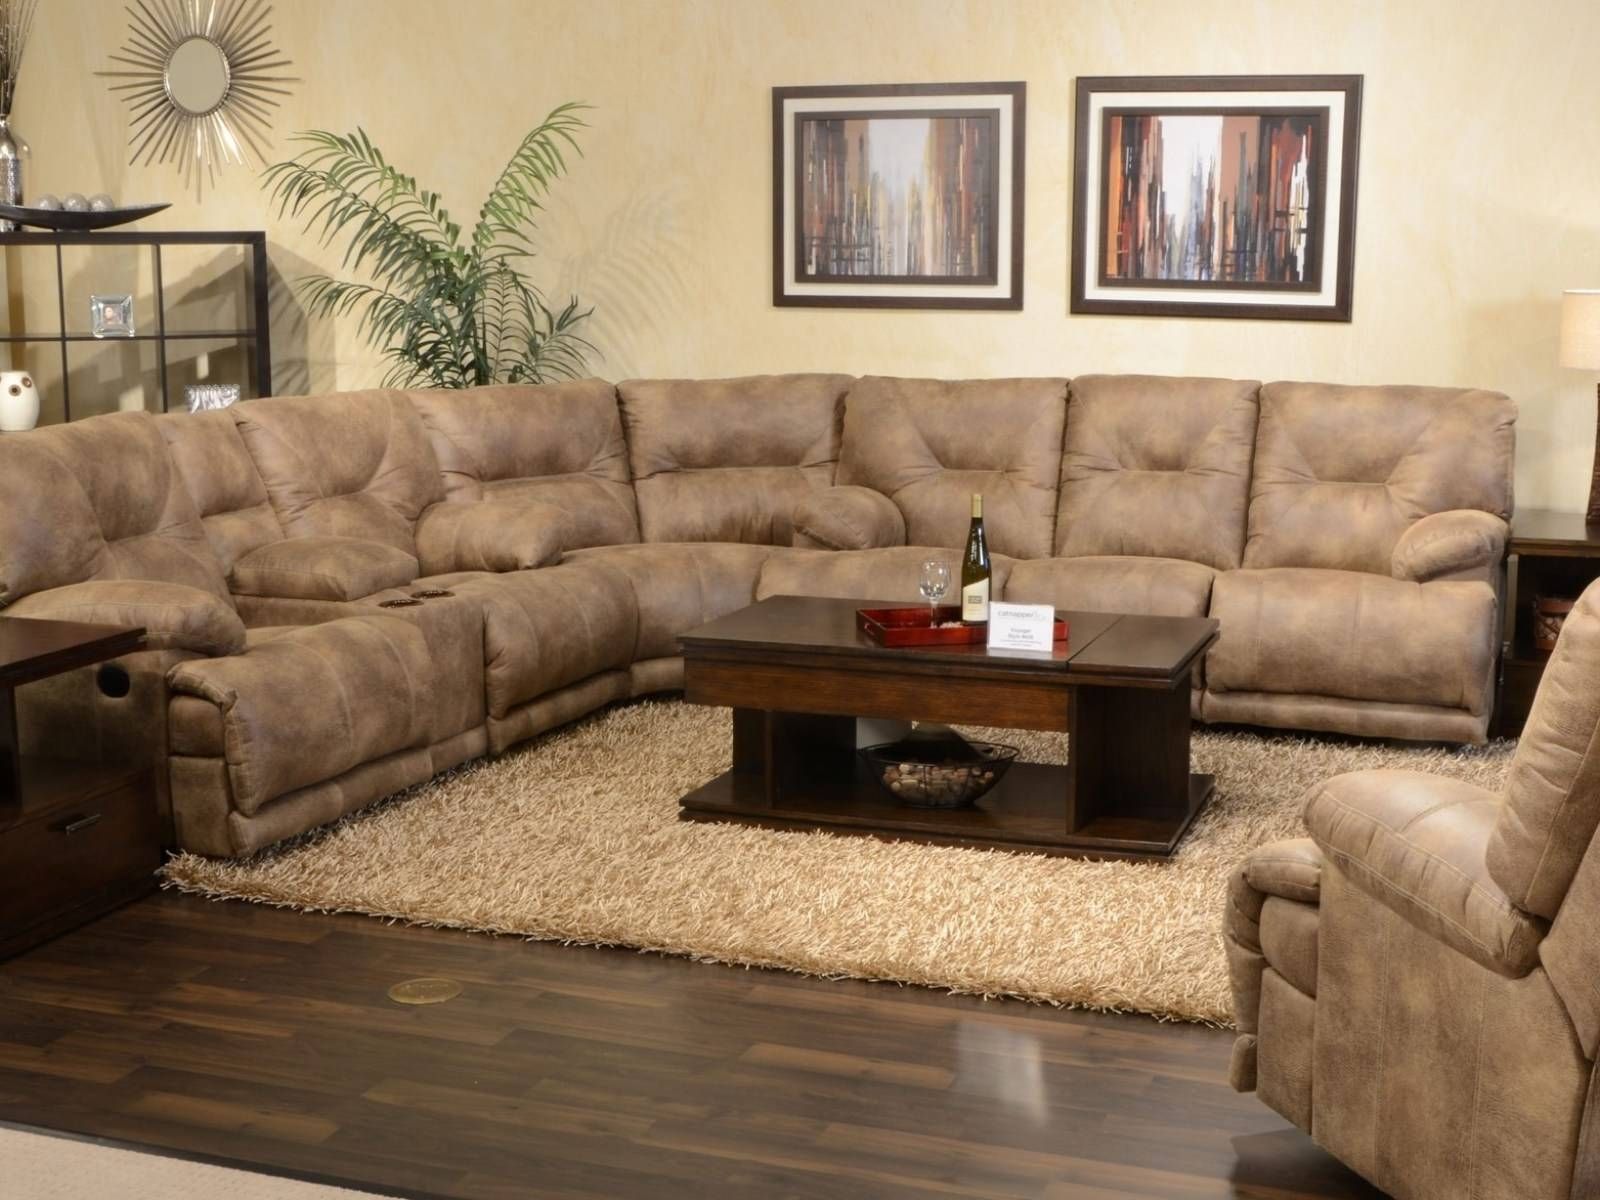 ▻ Sofa : 37 Beautiful Rustic Sectional Sofas With Chaise 6 Images Throughout Rustic Sectional Sofas (View 5 of 15)